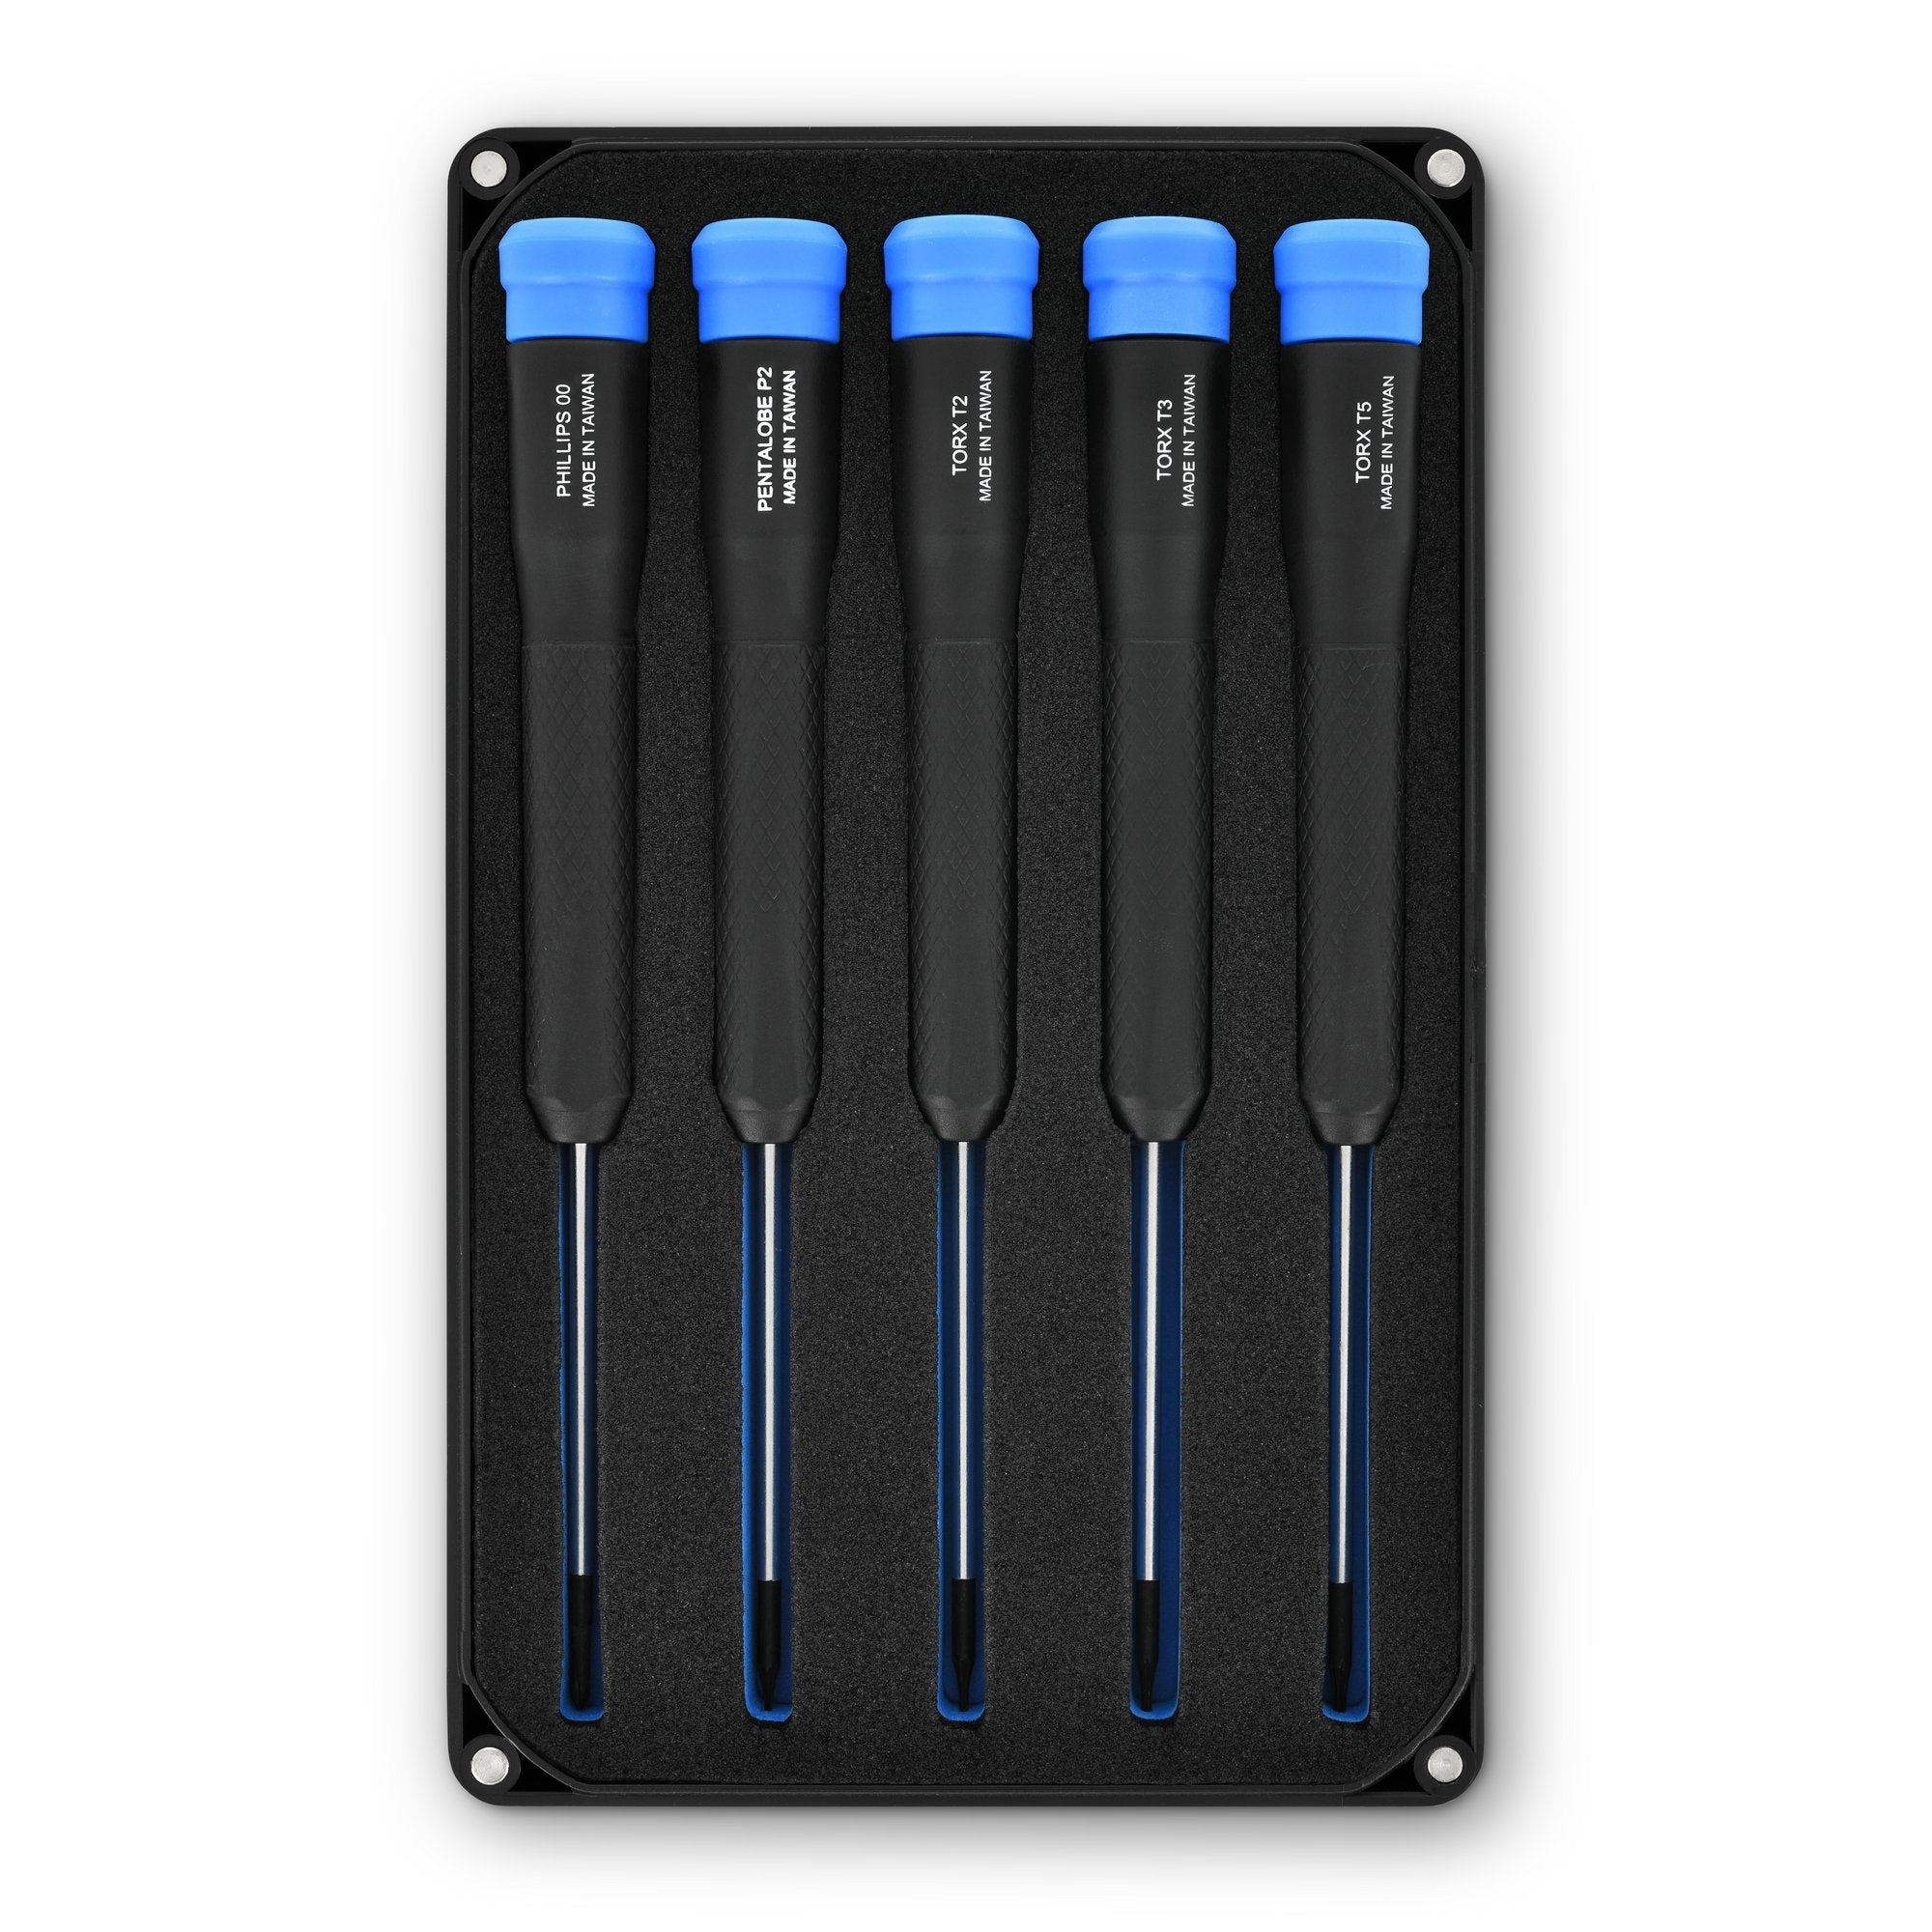 Marlin Screwdriver Set - 5 Precision Screwdrivers for Android New